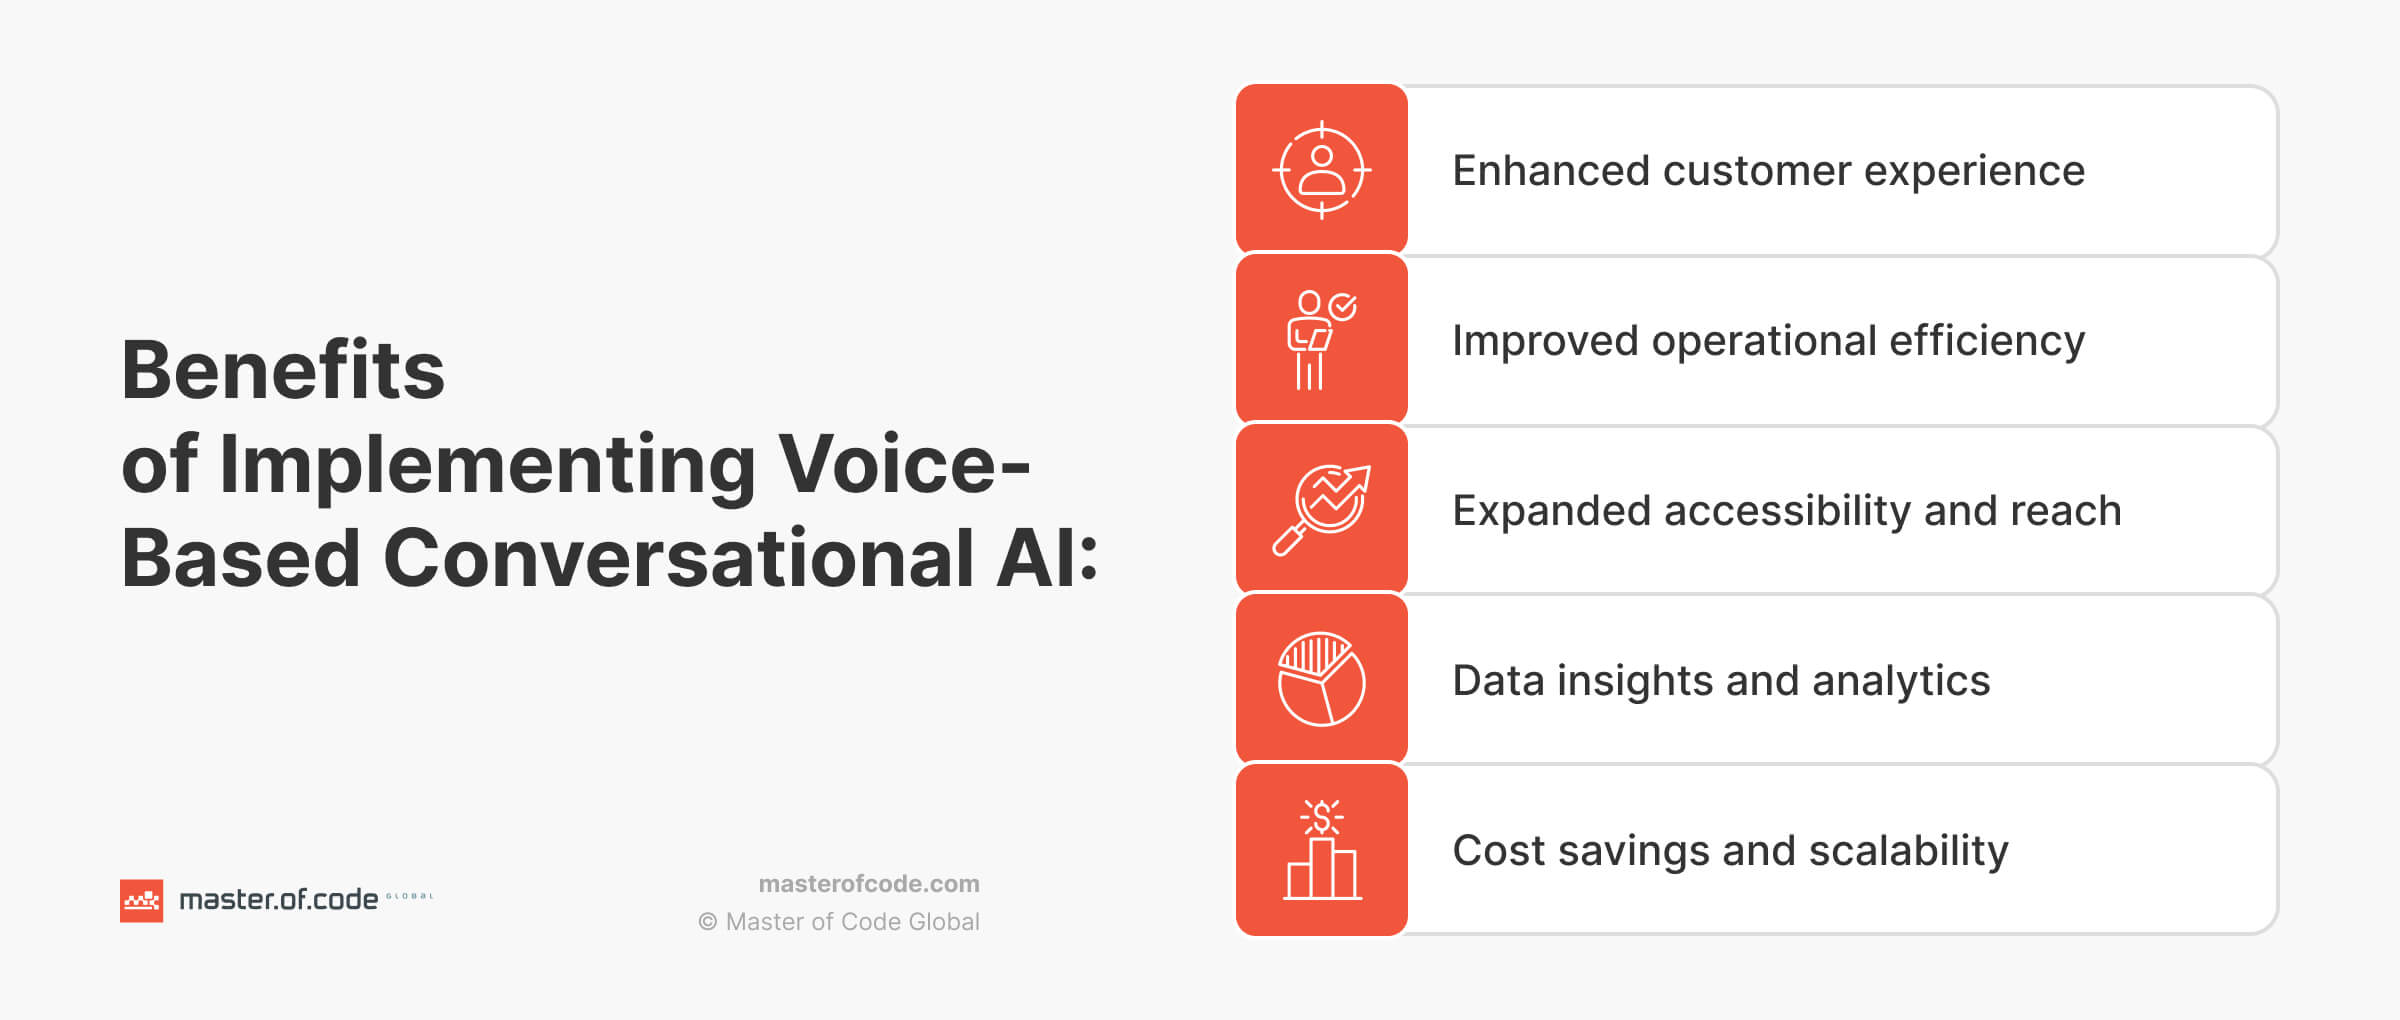 Benefits of Voice-Based Conversational AI